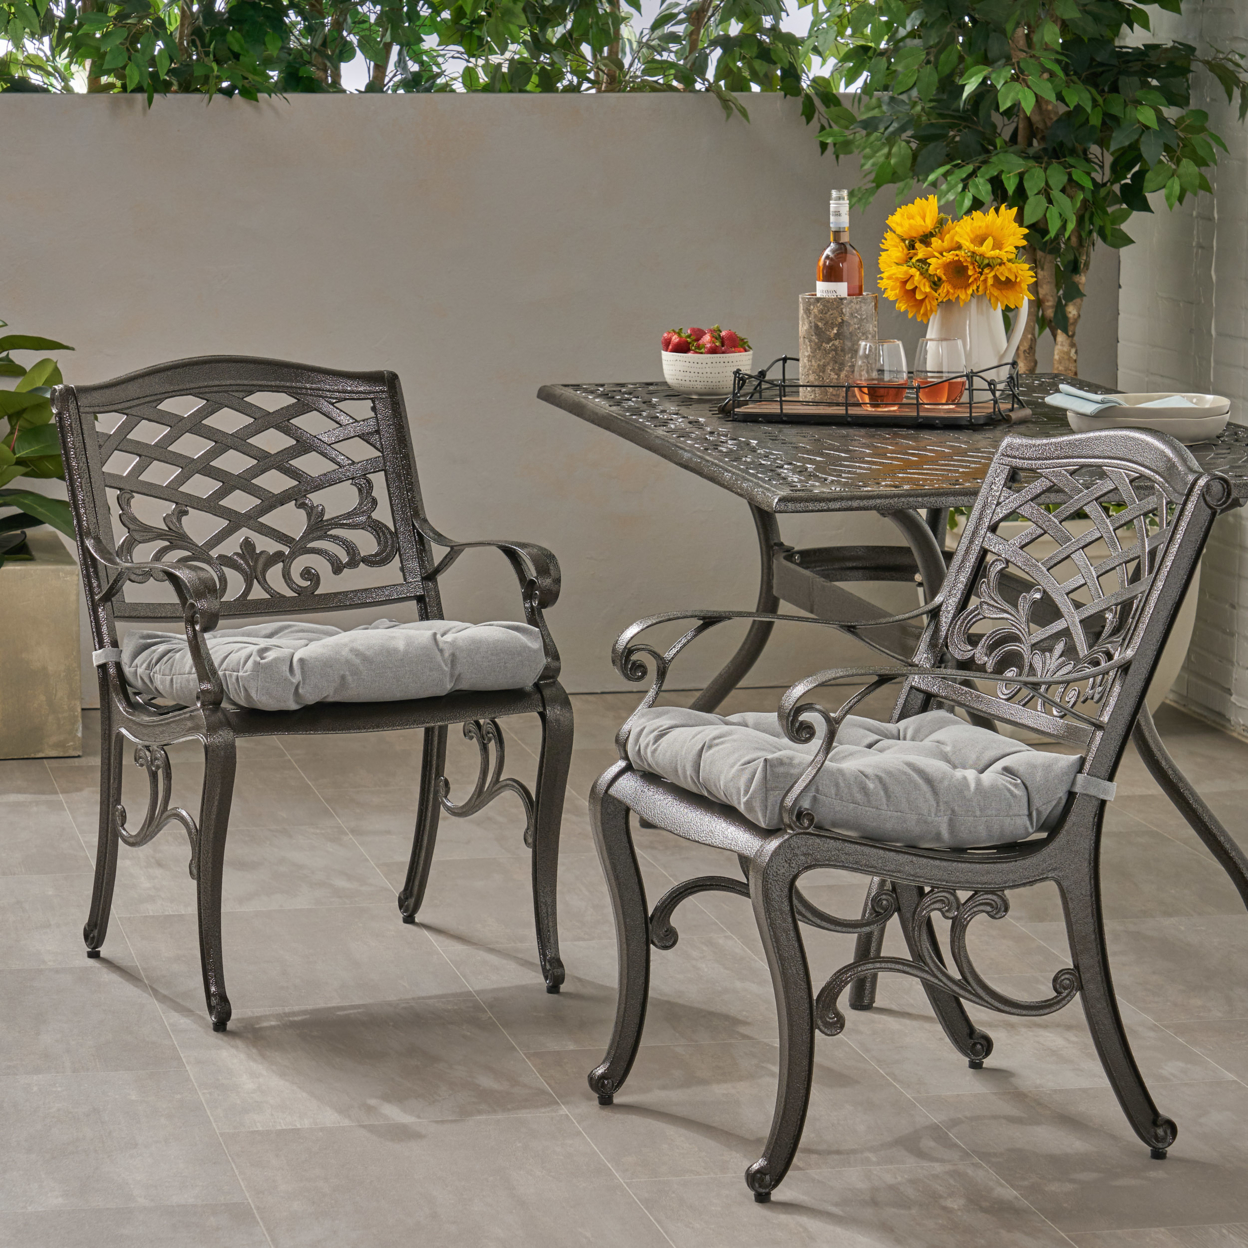 Ivy Outdoor Dining Chair With Cushion (Set Of 2) - Hammered Bronze + Charcoal